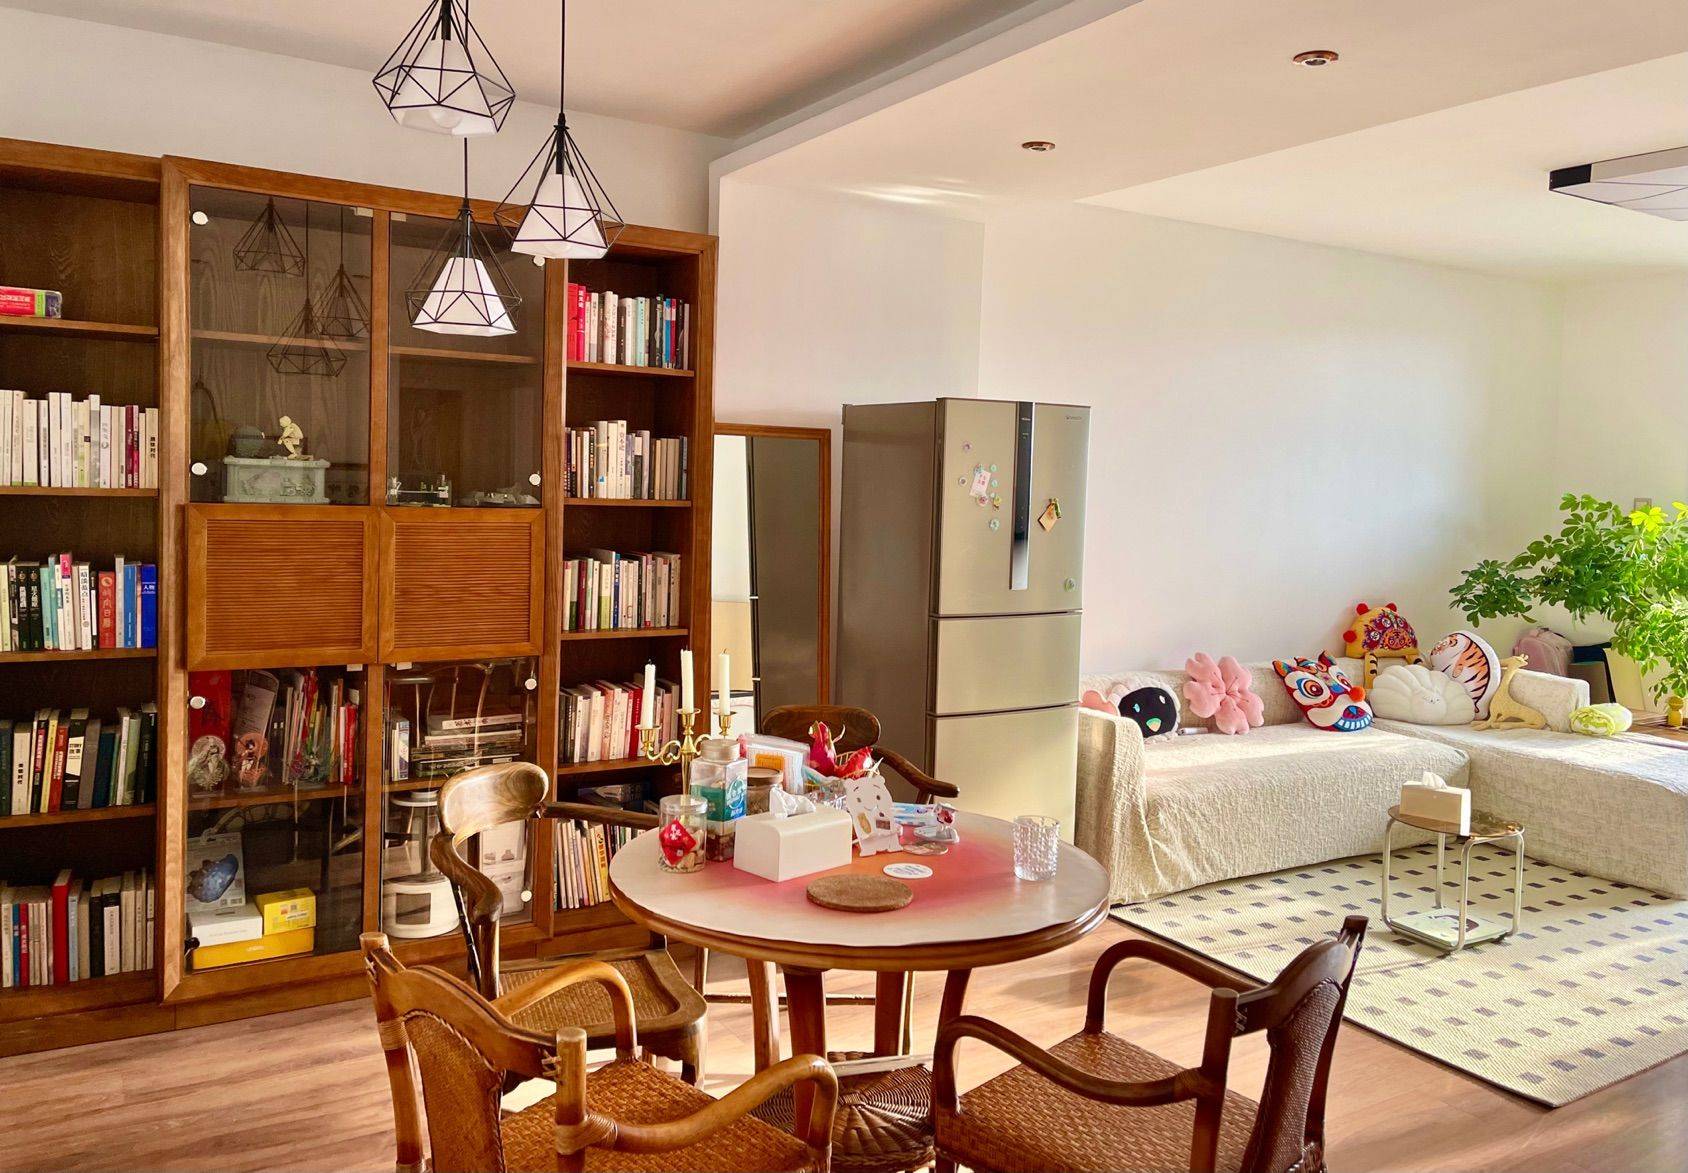 Beijing-Chaoyang-Cozy Home,Clean&Comfy,No Gender Limit,Hustle & Bustle,Chilled